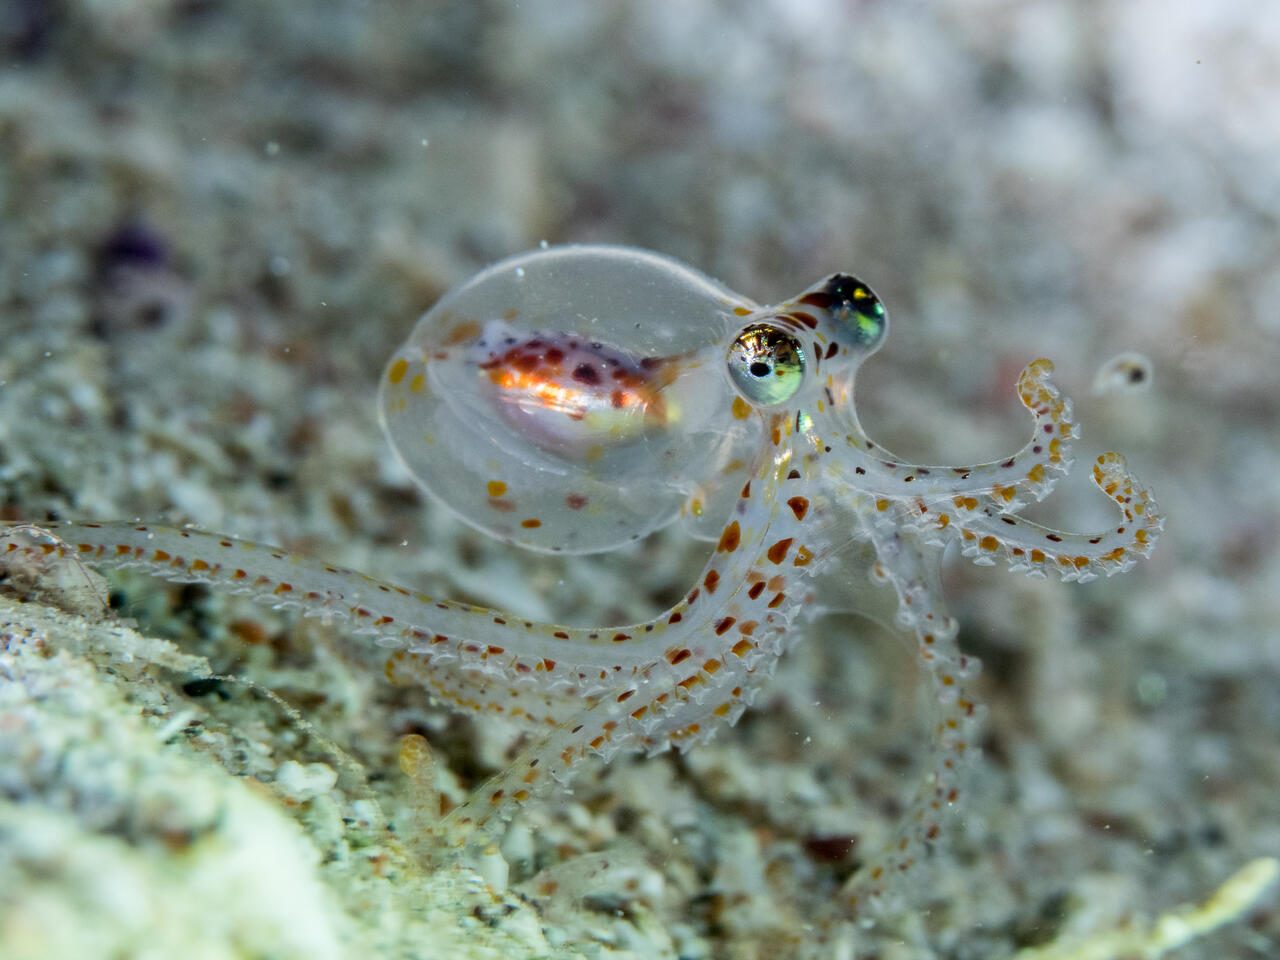 Octopuses have complex “camera” eyes, as seen here in a juvenile animal. © Nir Friedman